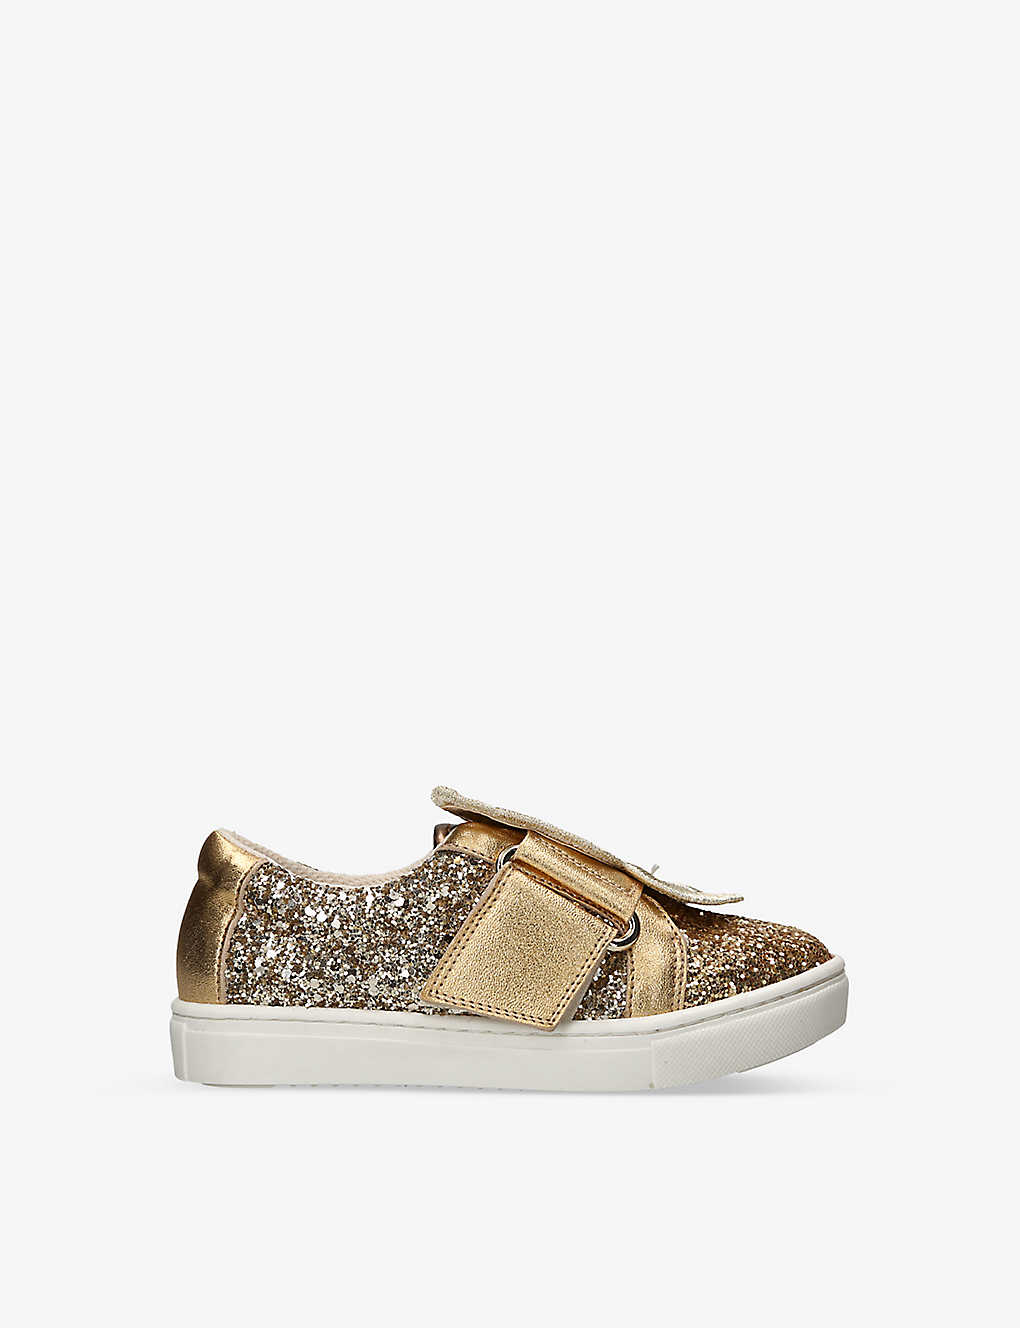 Sophia Webster Girls Gold Kids Butterfly-embellished Glitter Low-top Textile Trainers 3-8 Years